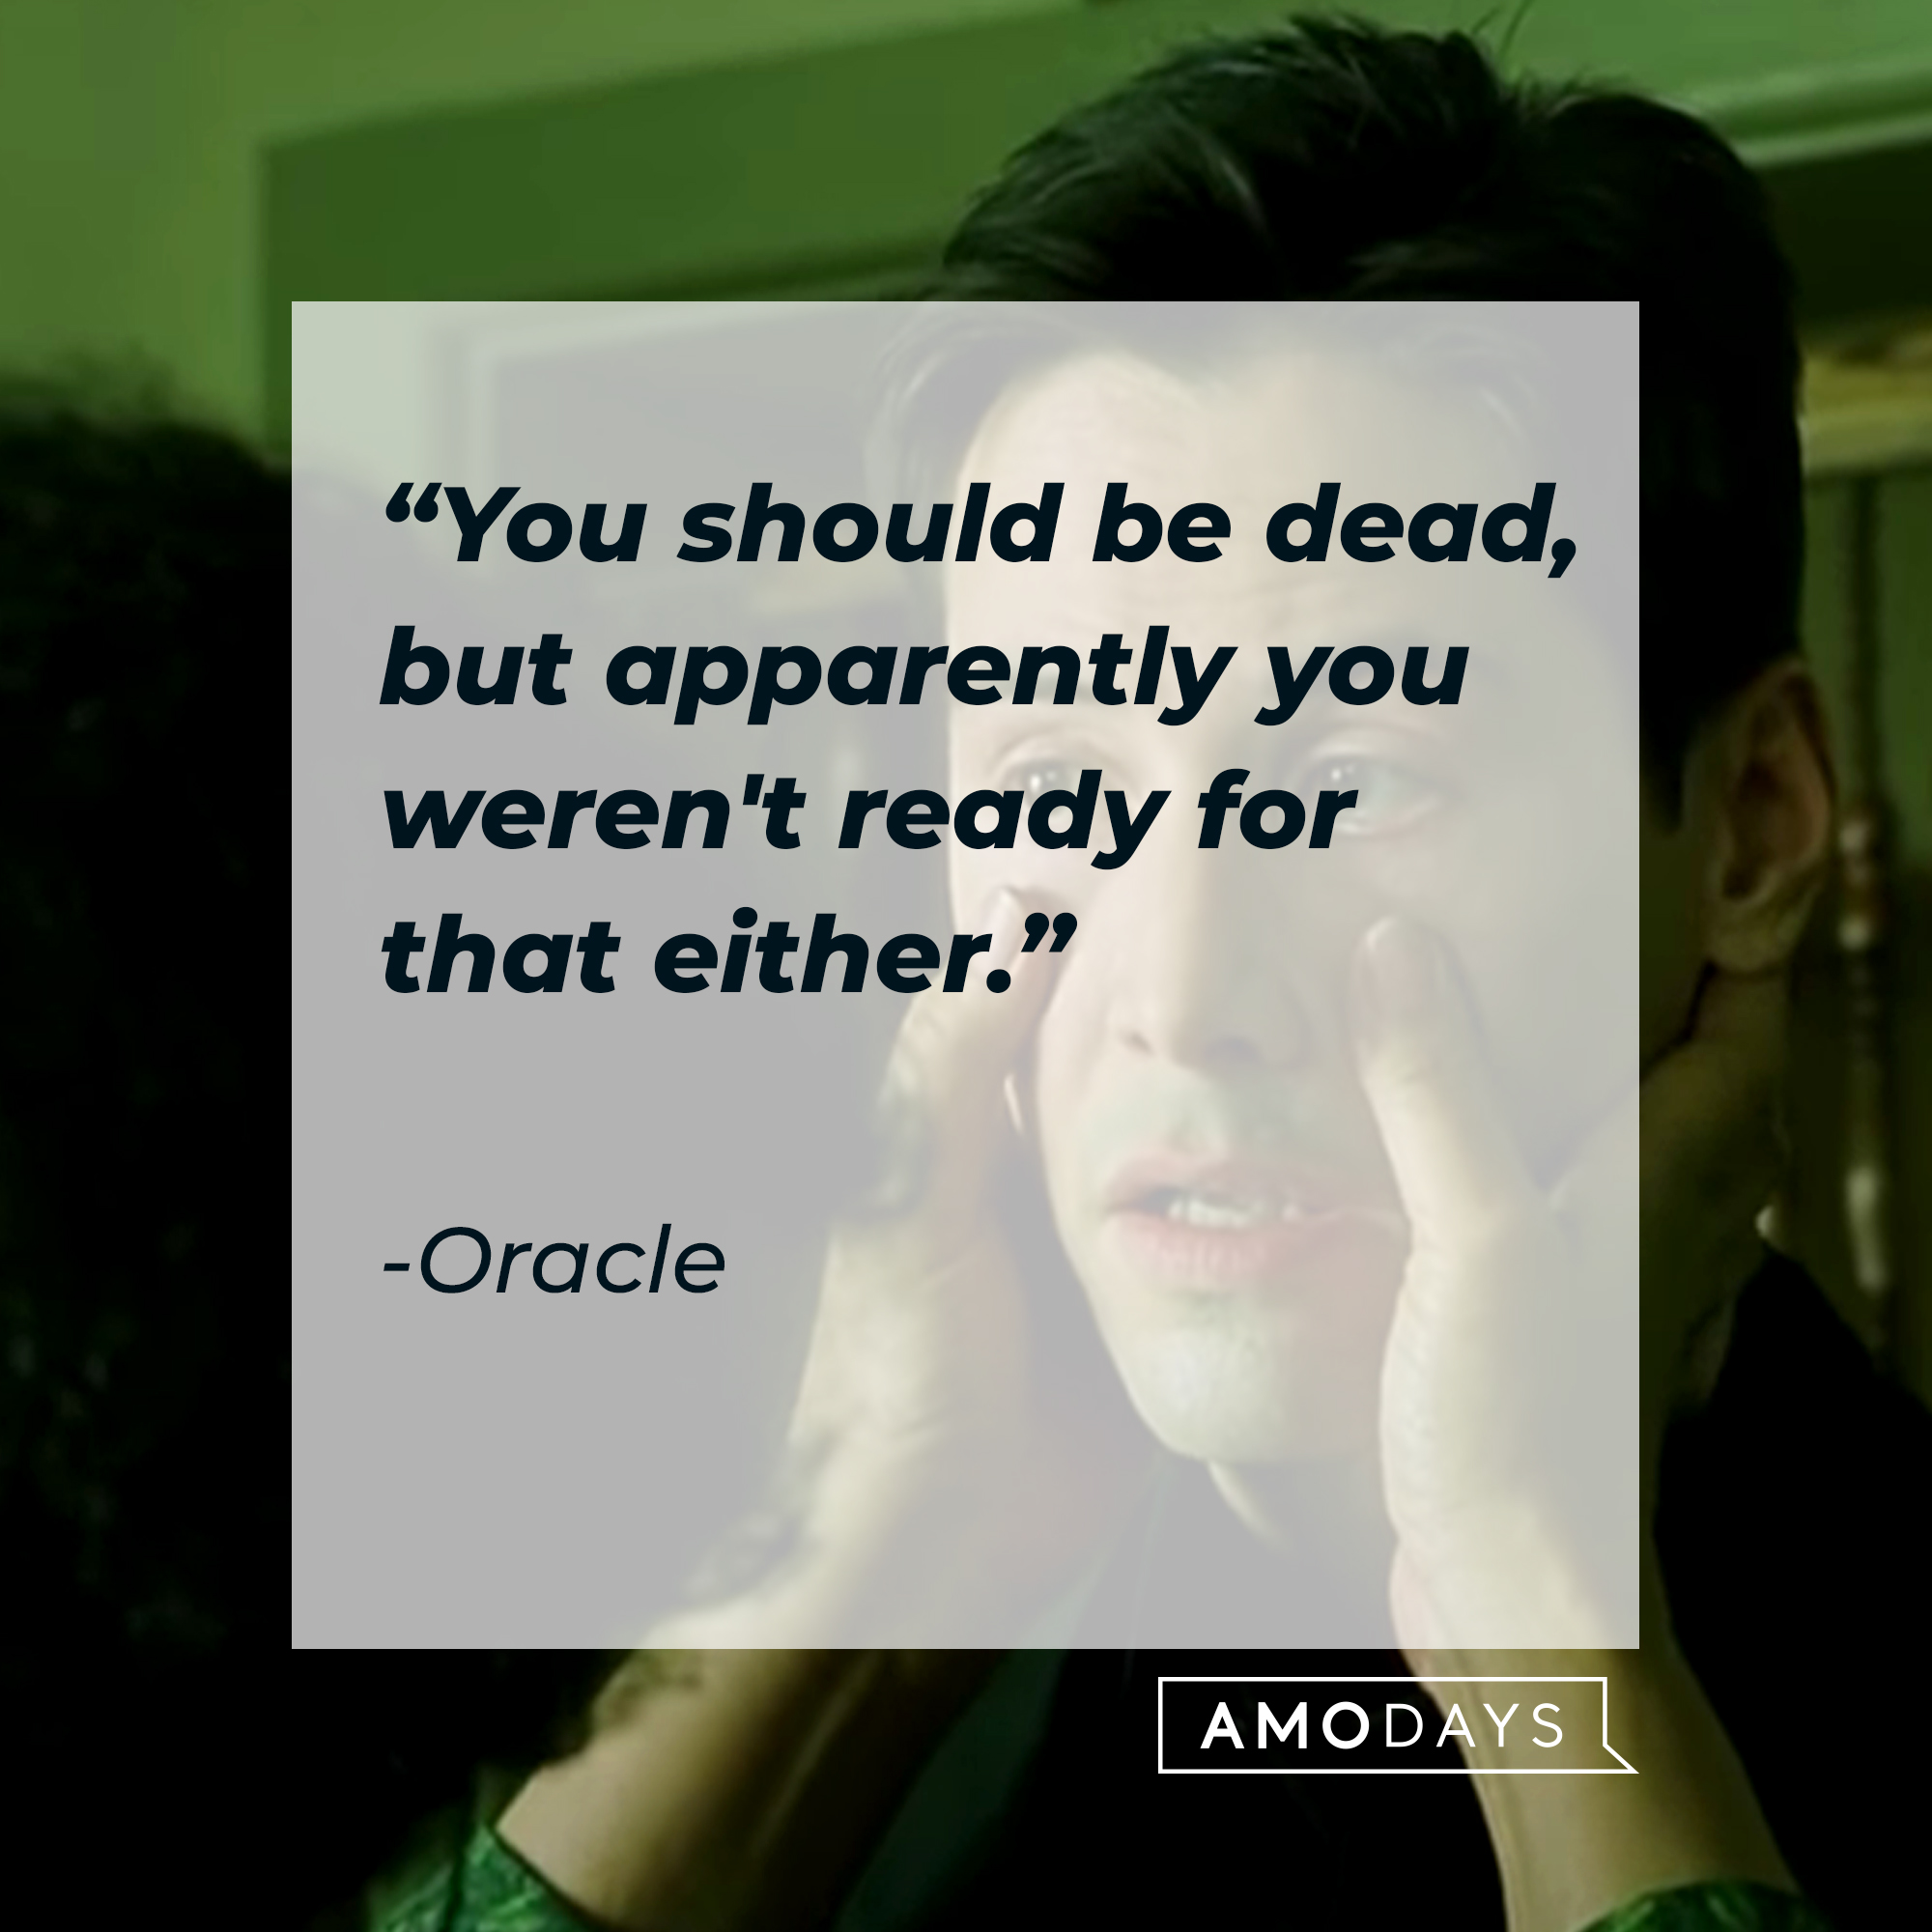 Oracle's quote: You should be dead, but apparently you weren't ready for that either." | Source: facebook.com/TheMatrixMovie